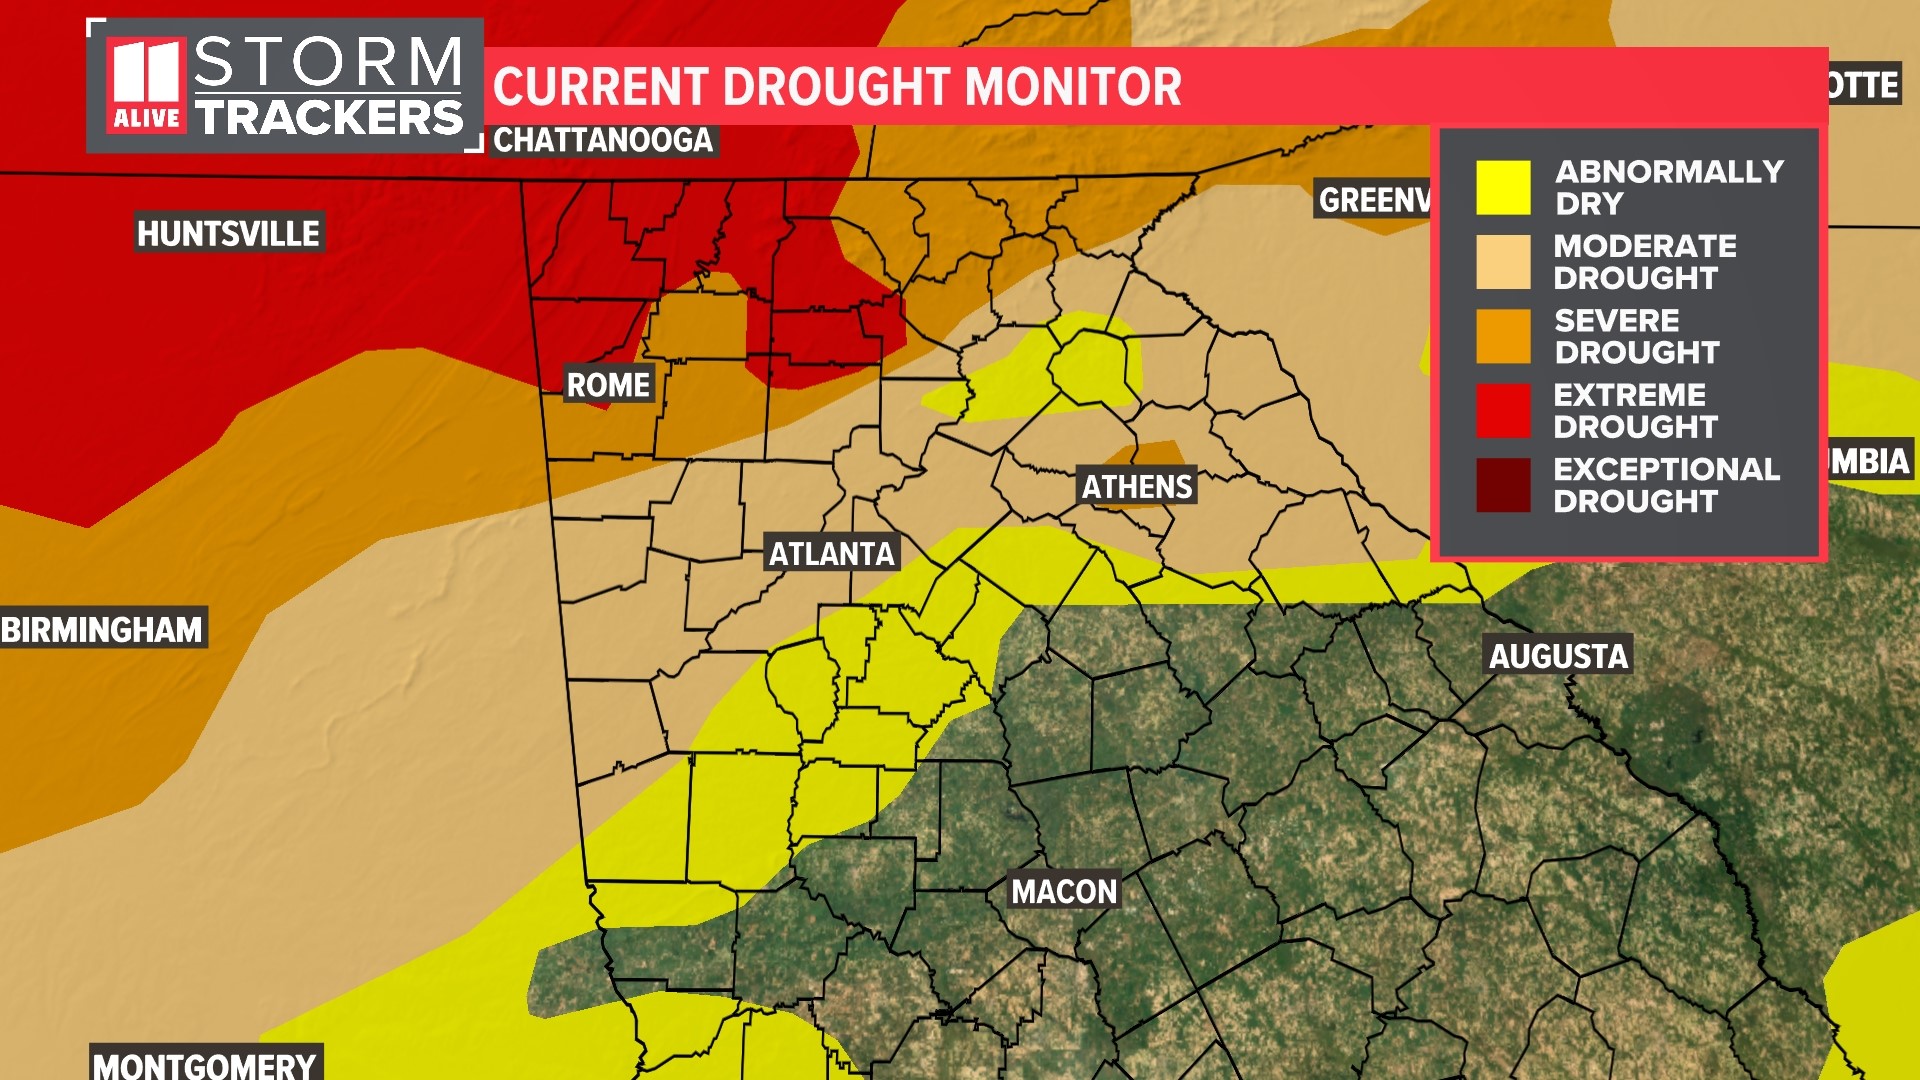 A Level 2 'Severe Drought' now extends across the rest of far north Georgia along the border with Tennessee and North Carolina.